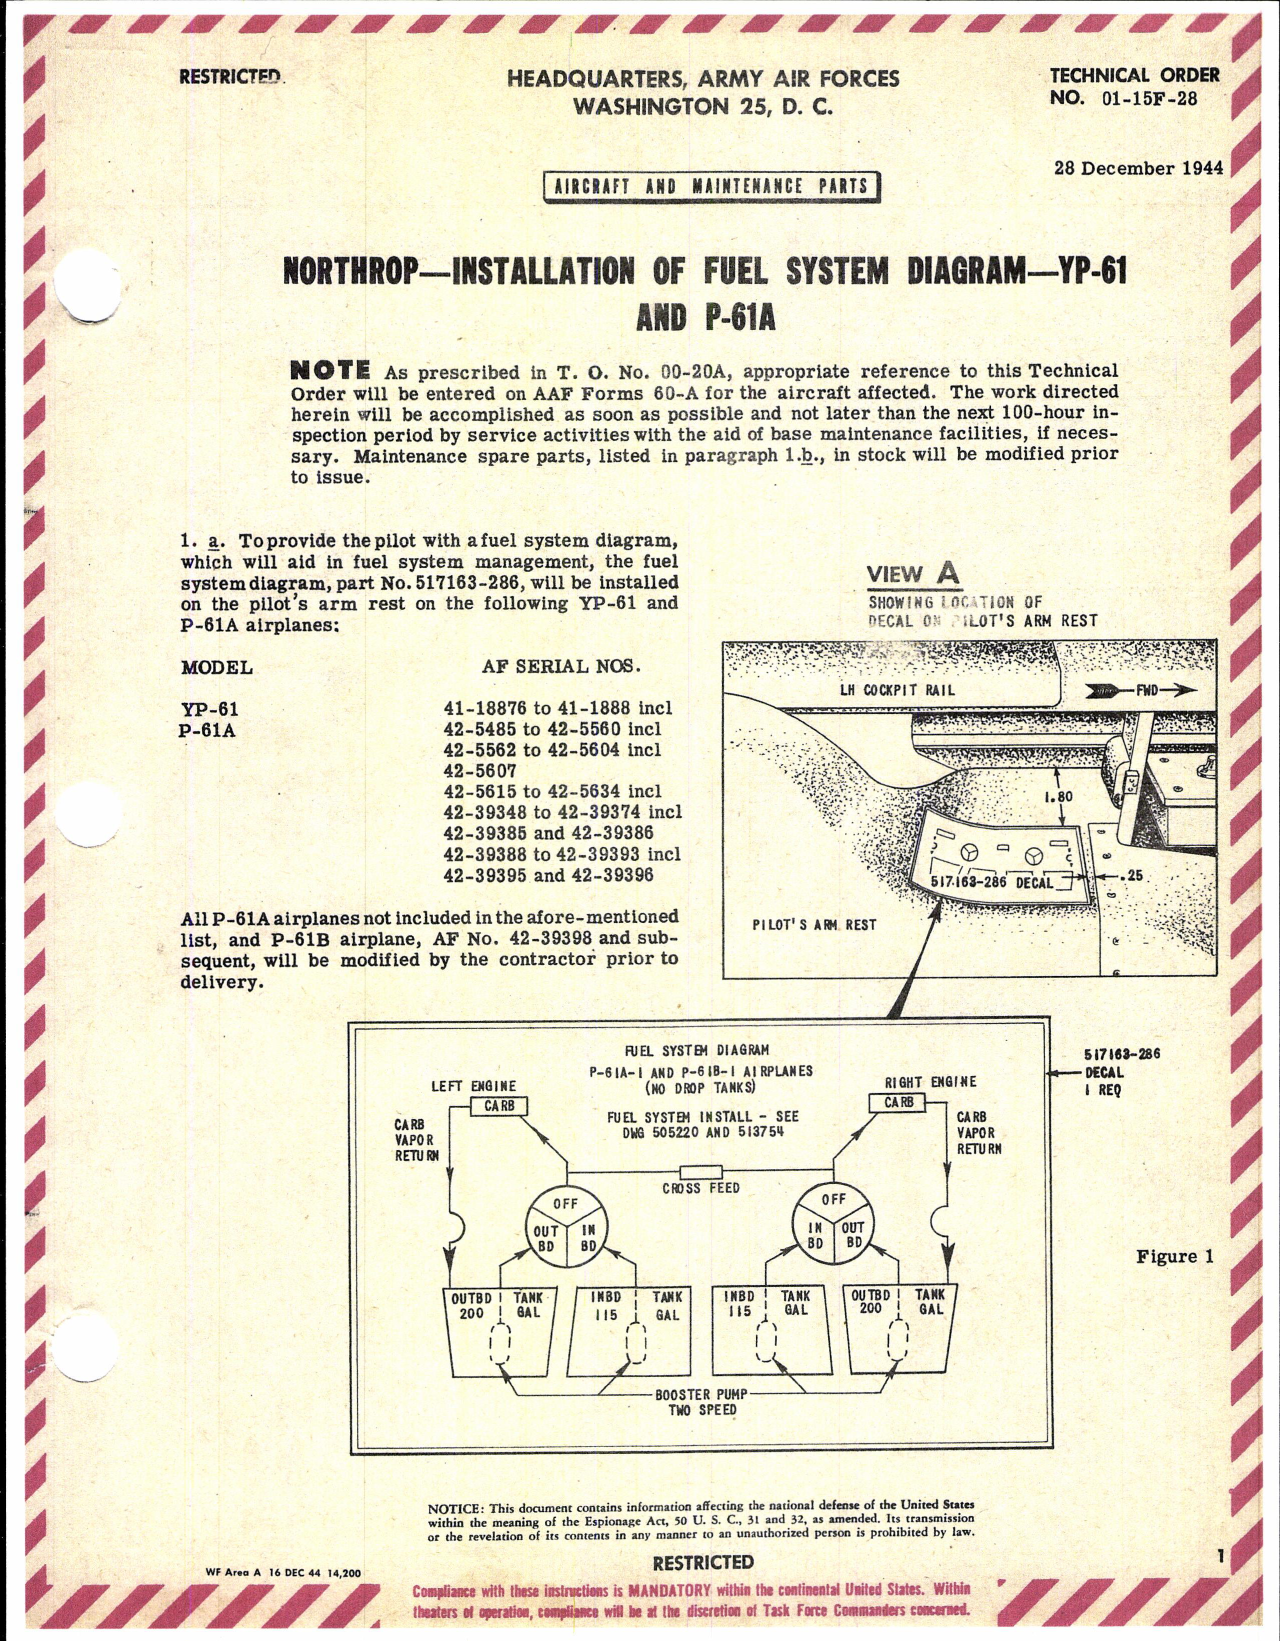 Sample page 1 from AirCorps Library document: Northrop - Installation of Fuel System Diagram for YP-61 and P-61A